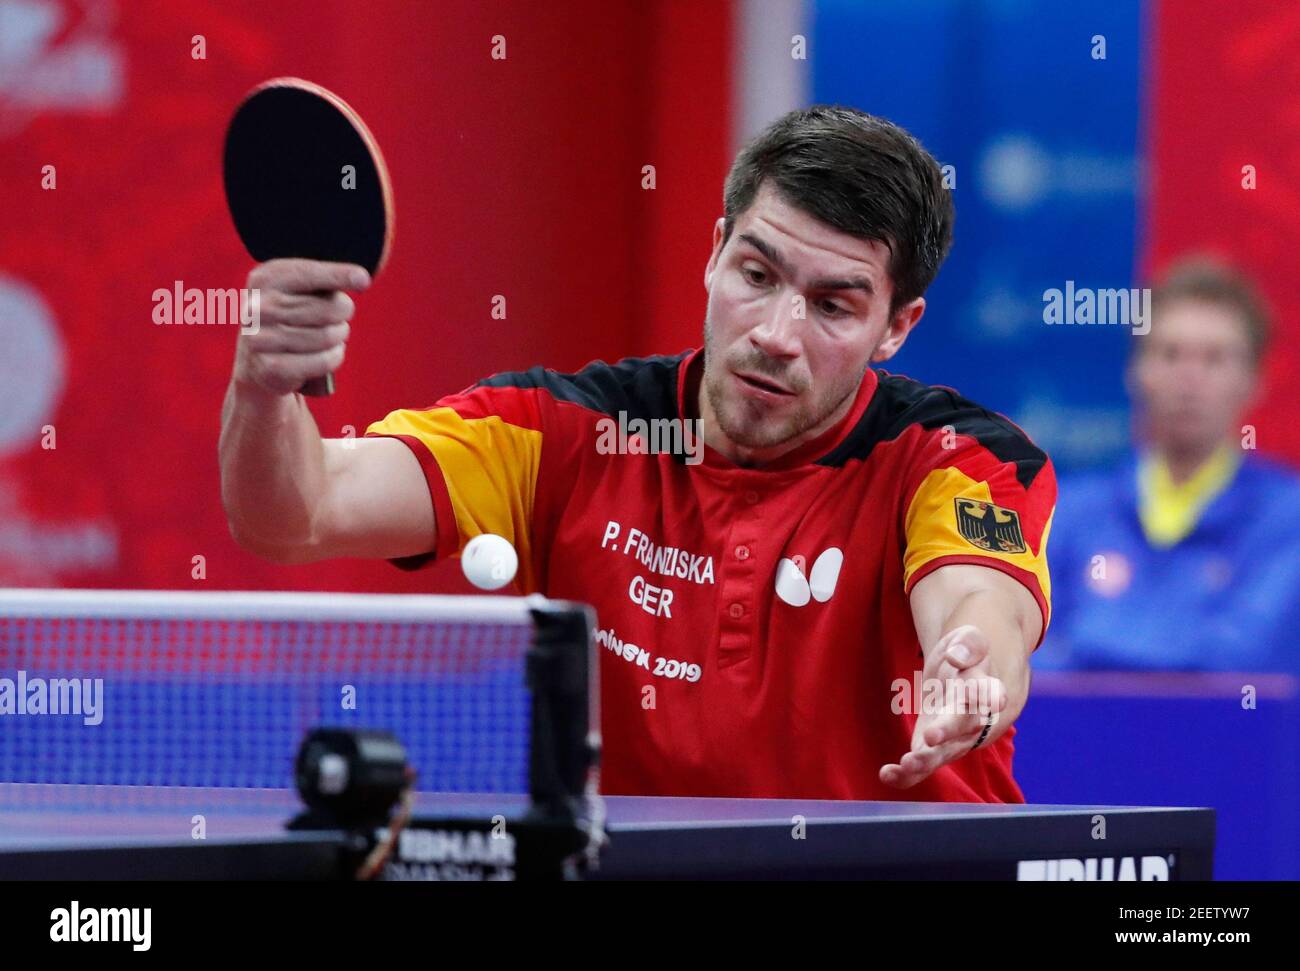 2019 European Games - Table Tennis - Men's Team - Tennis Olympic Centre,  Minsk, Belarus - June 29, 2019. Germany's Patrick Franziska in action  during match three of the gold medal match